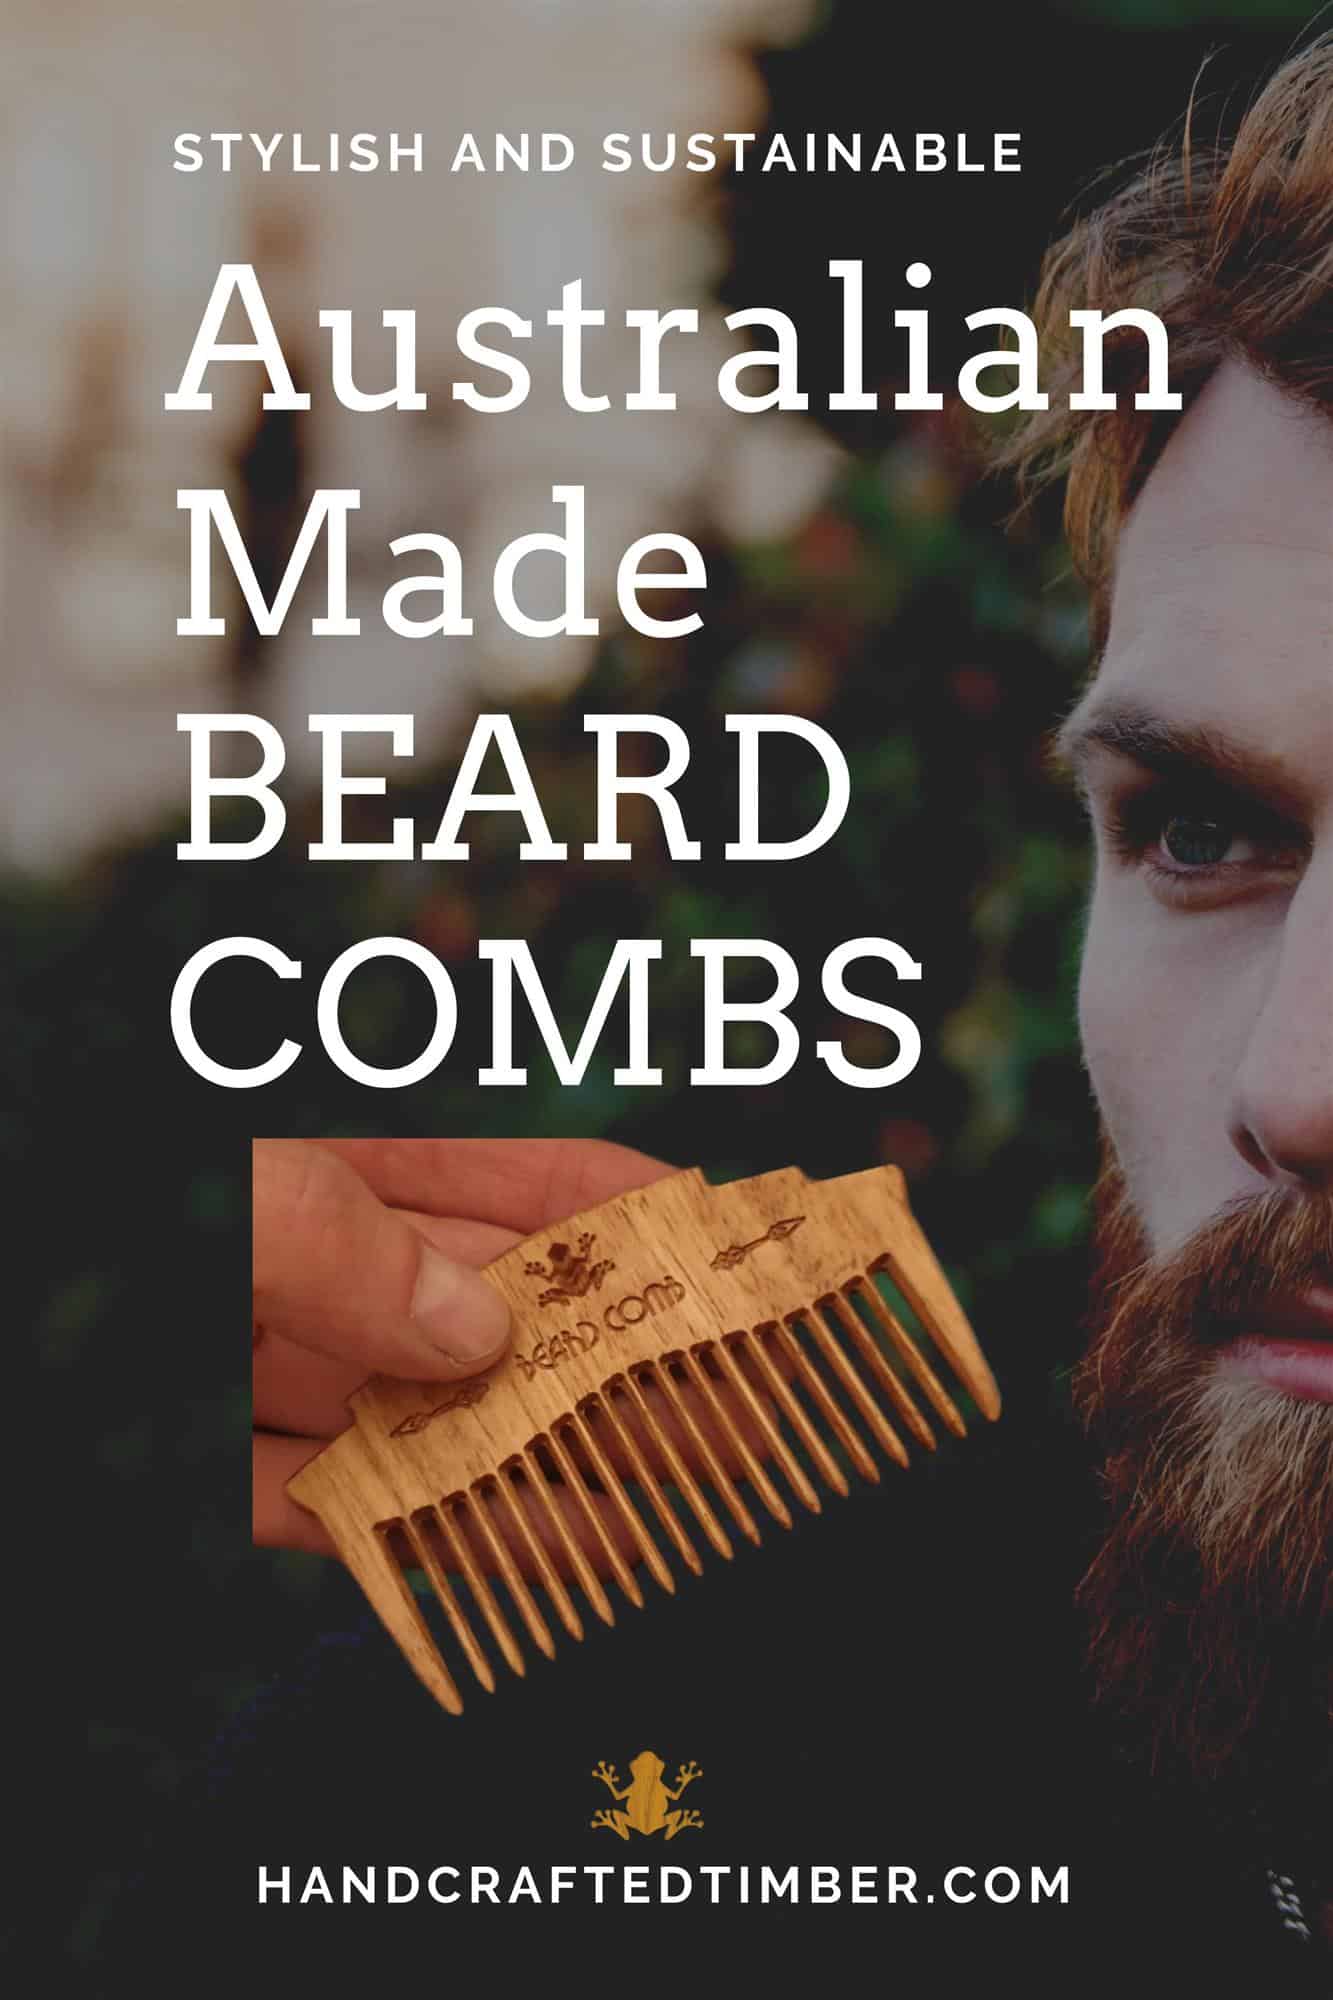 Wooden Beard Combs Handcrafted in Australia Stylish and Sustainable available from handcraftedtimber.com